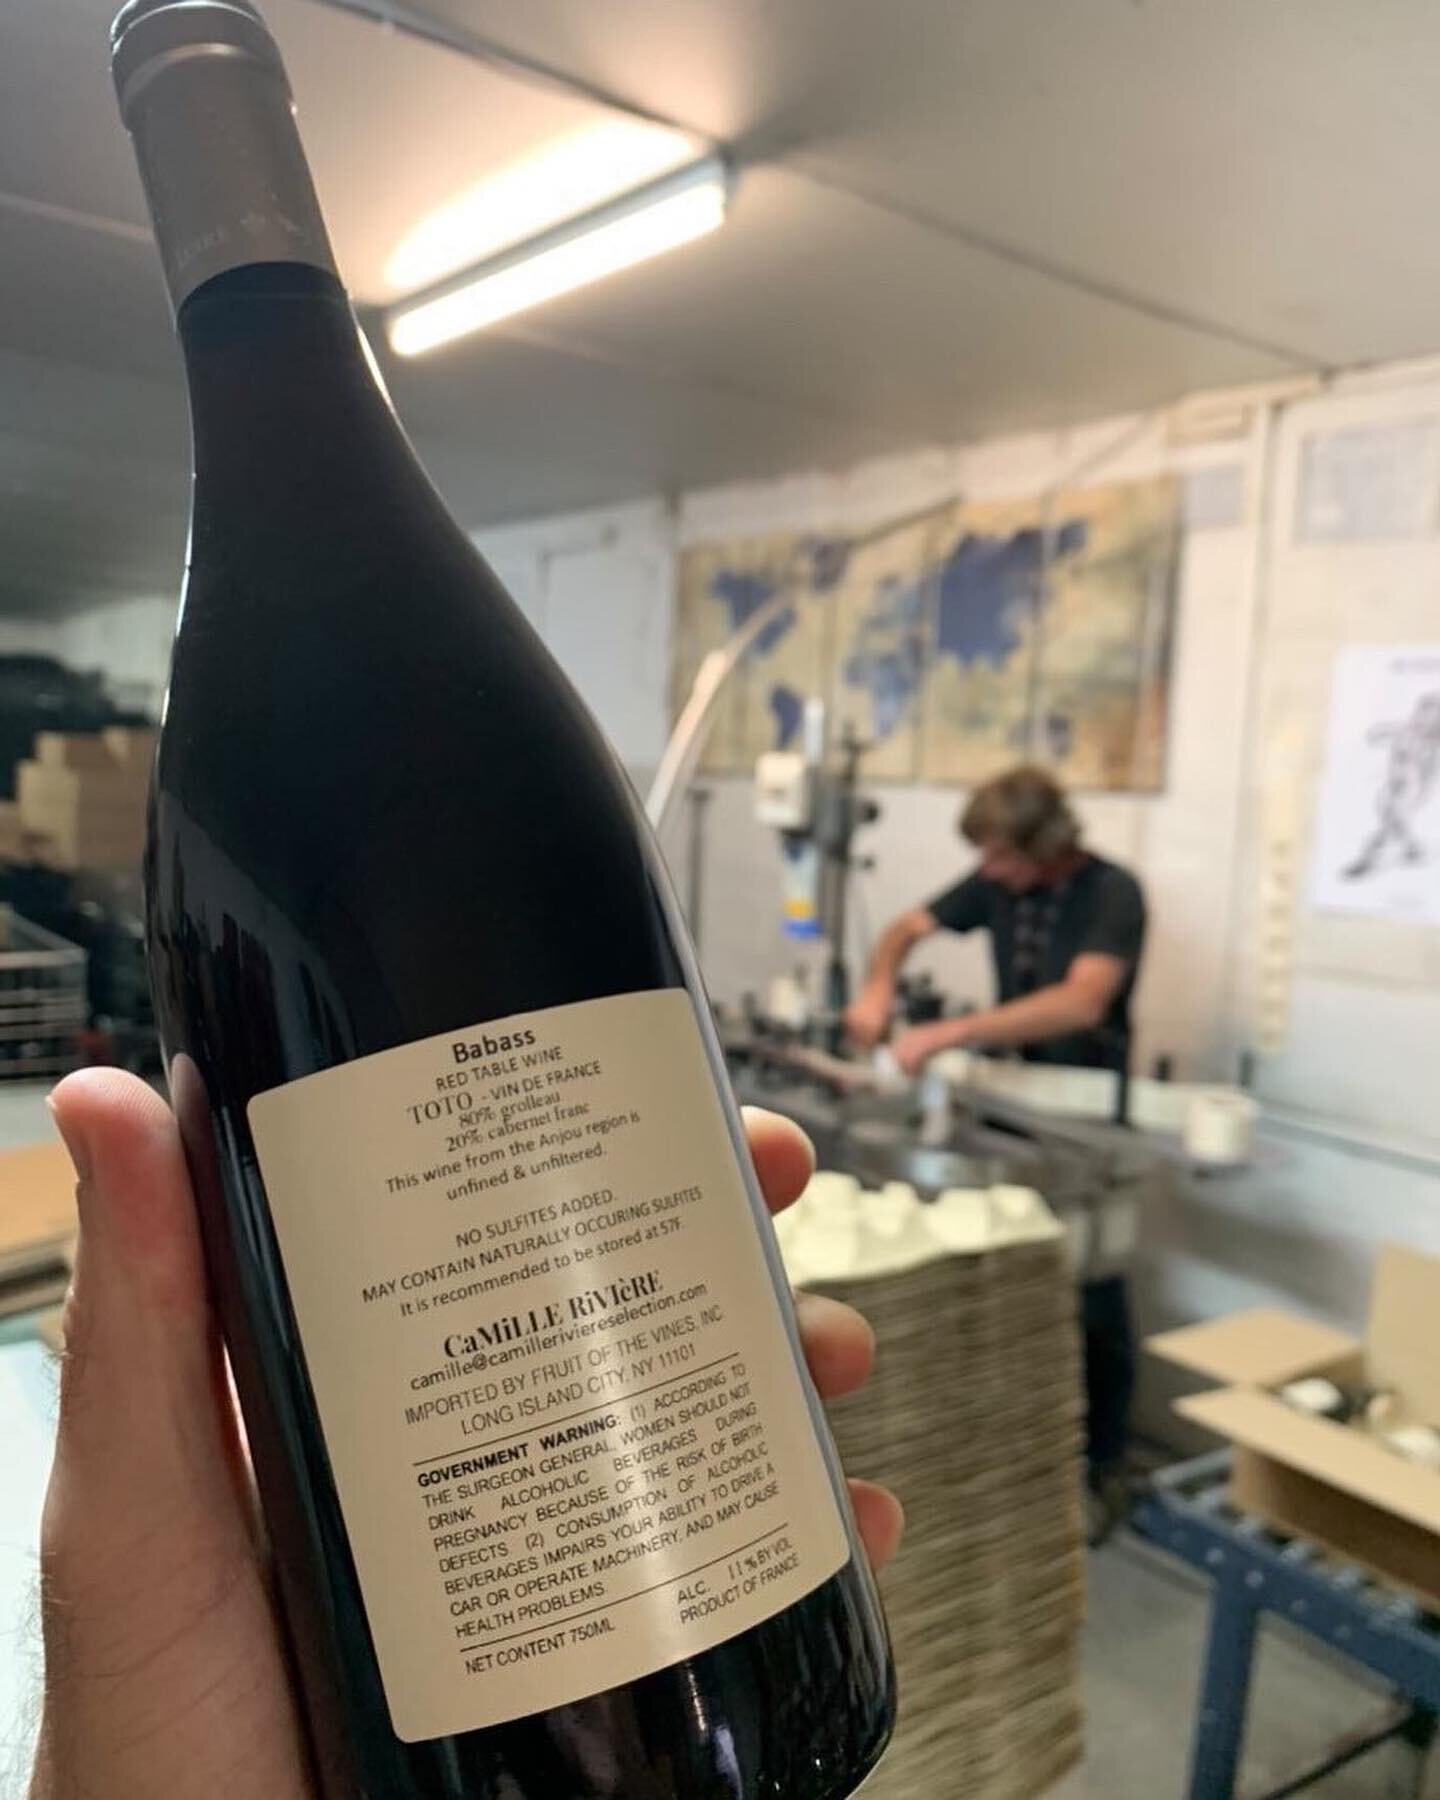 @lesvignesdebabass arriving soon (ETA 11/01 🇺🇸): 2021 had super low yields, so S&eacute;bastien &amp; Agn&egrave;s had to buy some grolleau from a neighbor.  It's the first time he has ever had to do this!  There was a total production of 100 cases